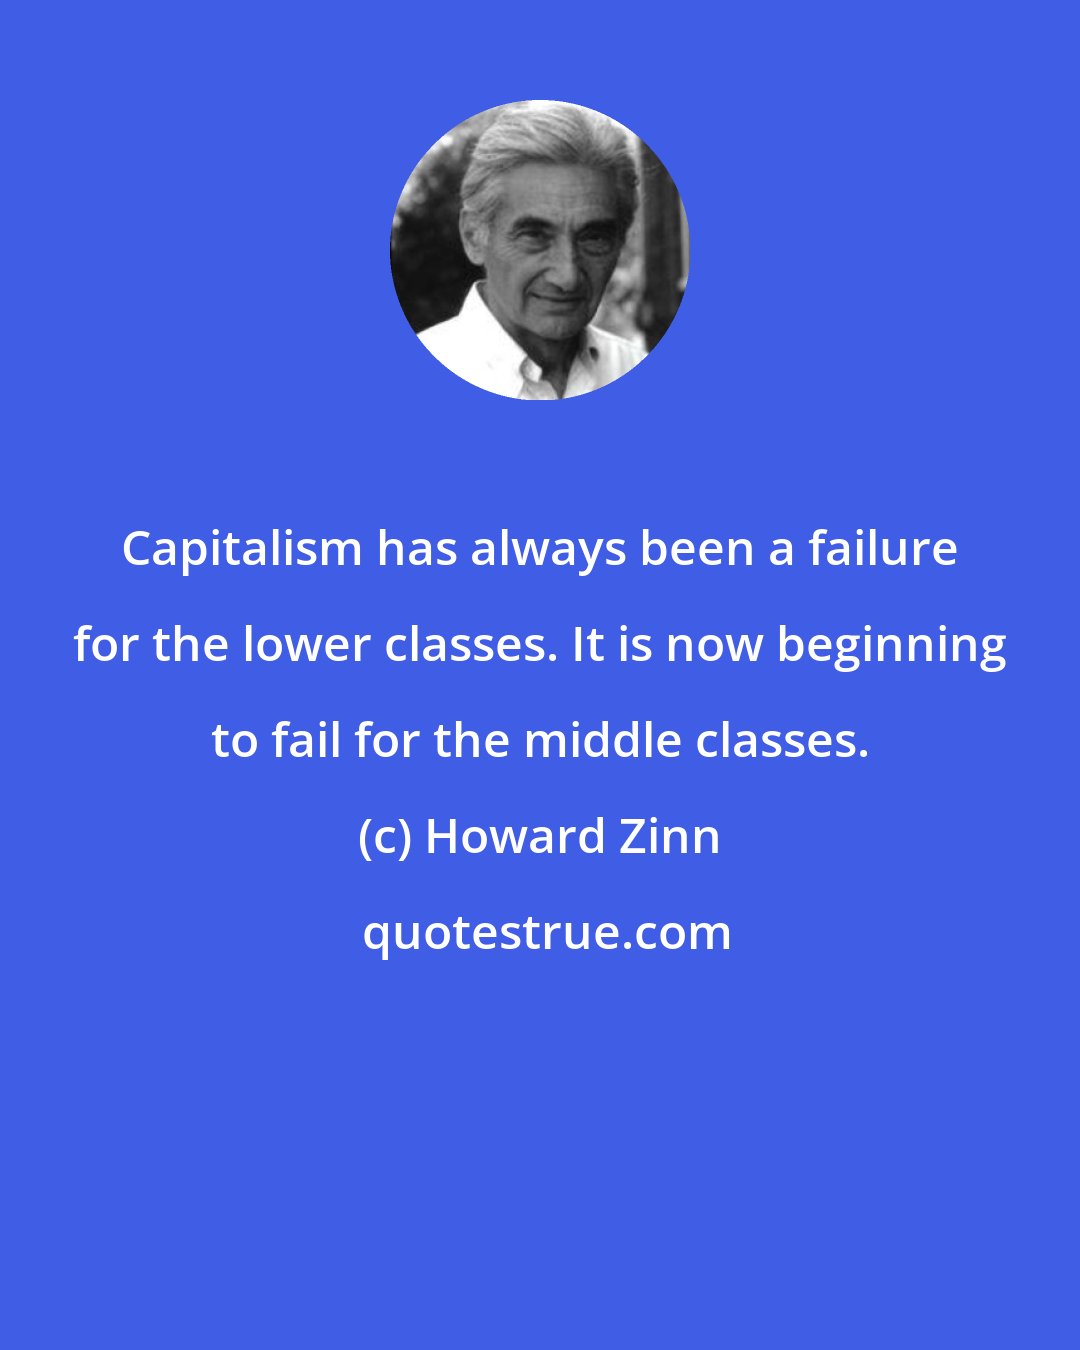 Howard Zinn: Capitalism has always been a failure for the lower classes. It is now beginning to fail for the middle classes.